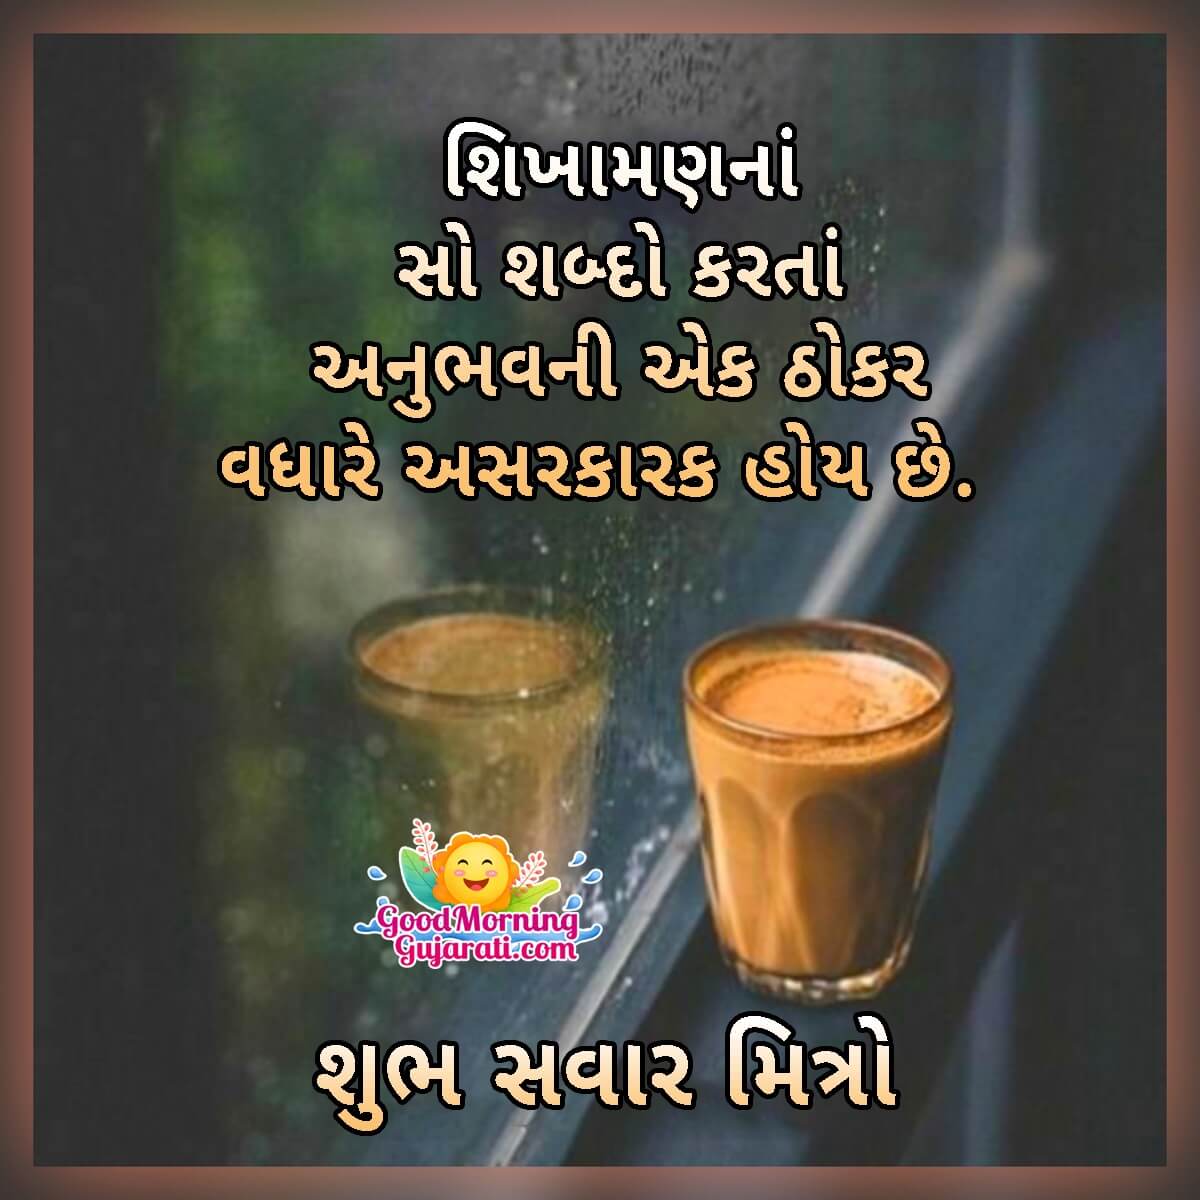 Good Morning Messages To Friends In Gujarati - Good Morning Wishes ...